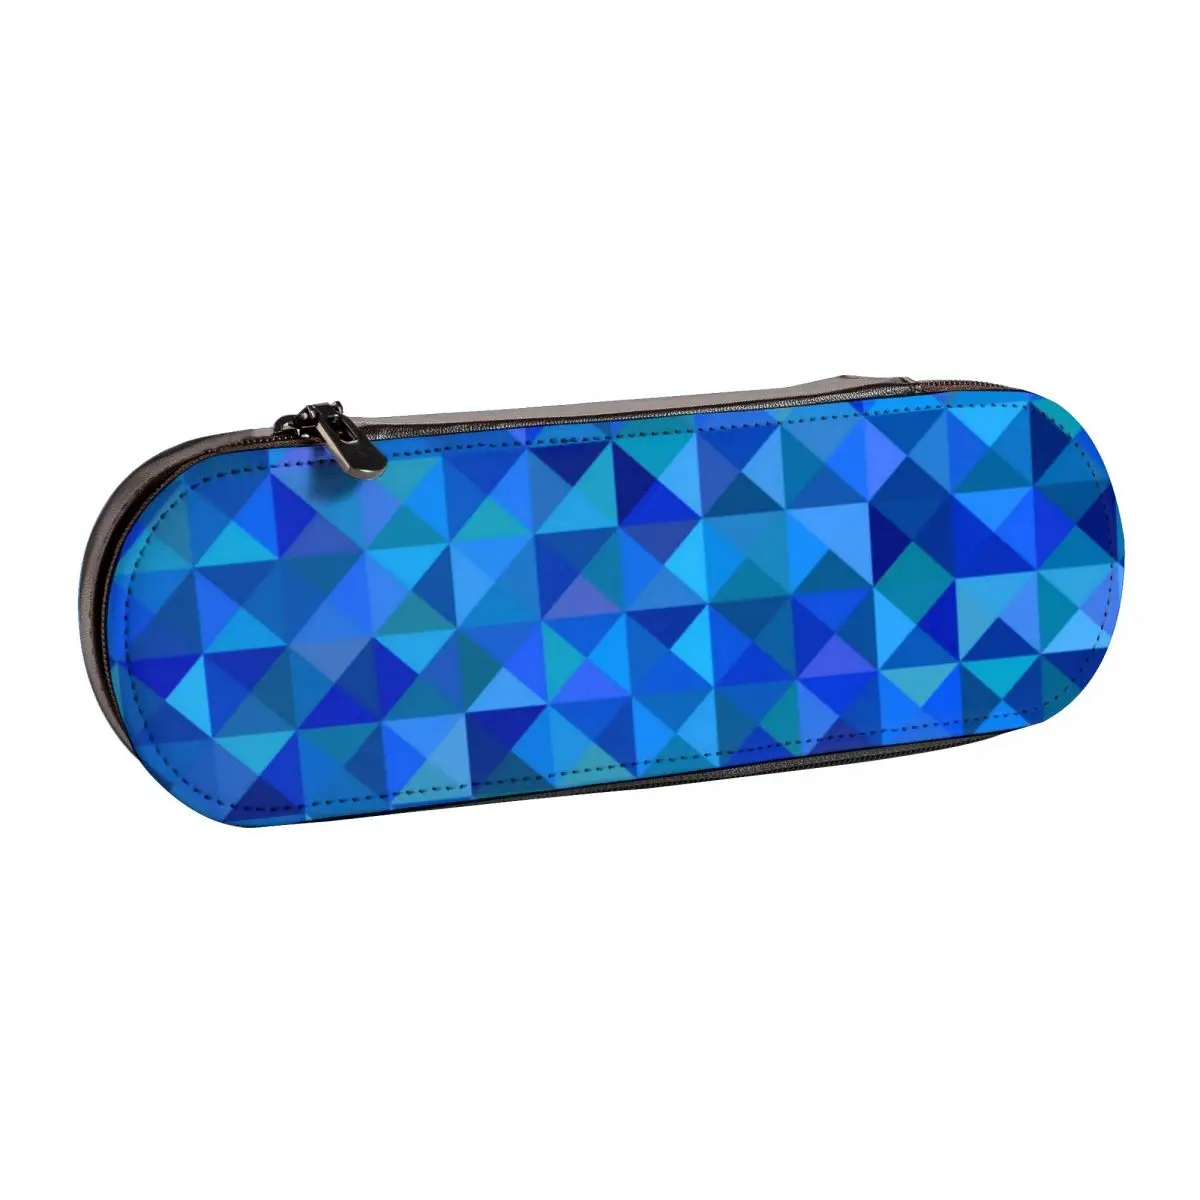 

Blue Geo Print Pencil Case Abstract Triangle Elementary School For Teens Leather Pencil Box Fashion Quality Pen Organizer